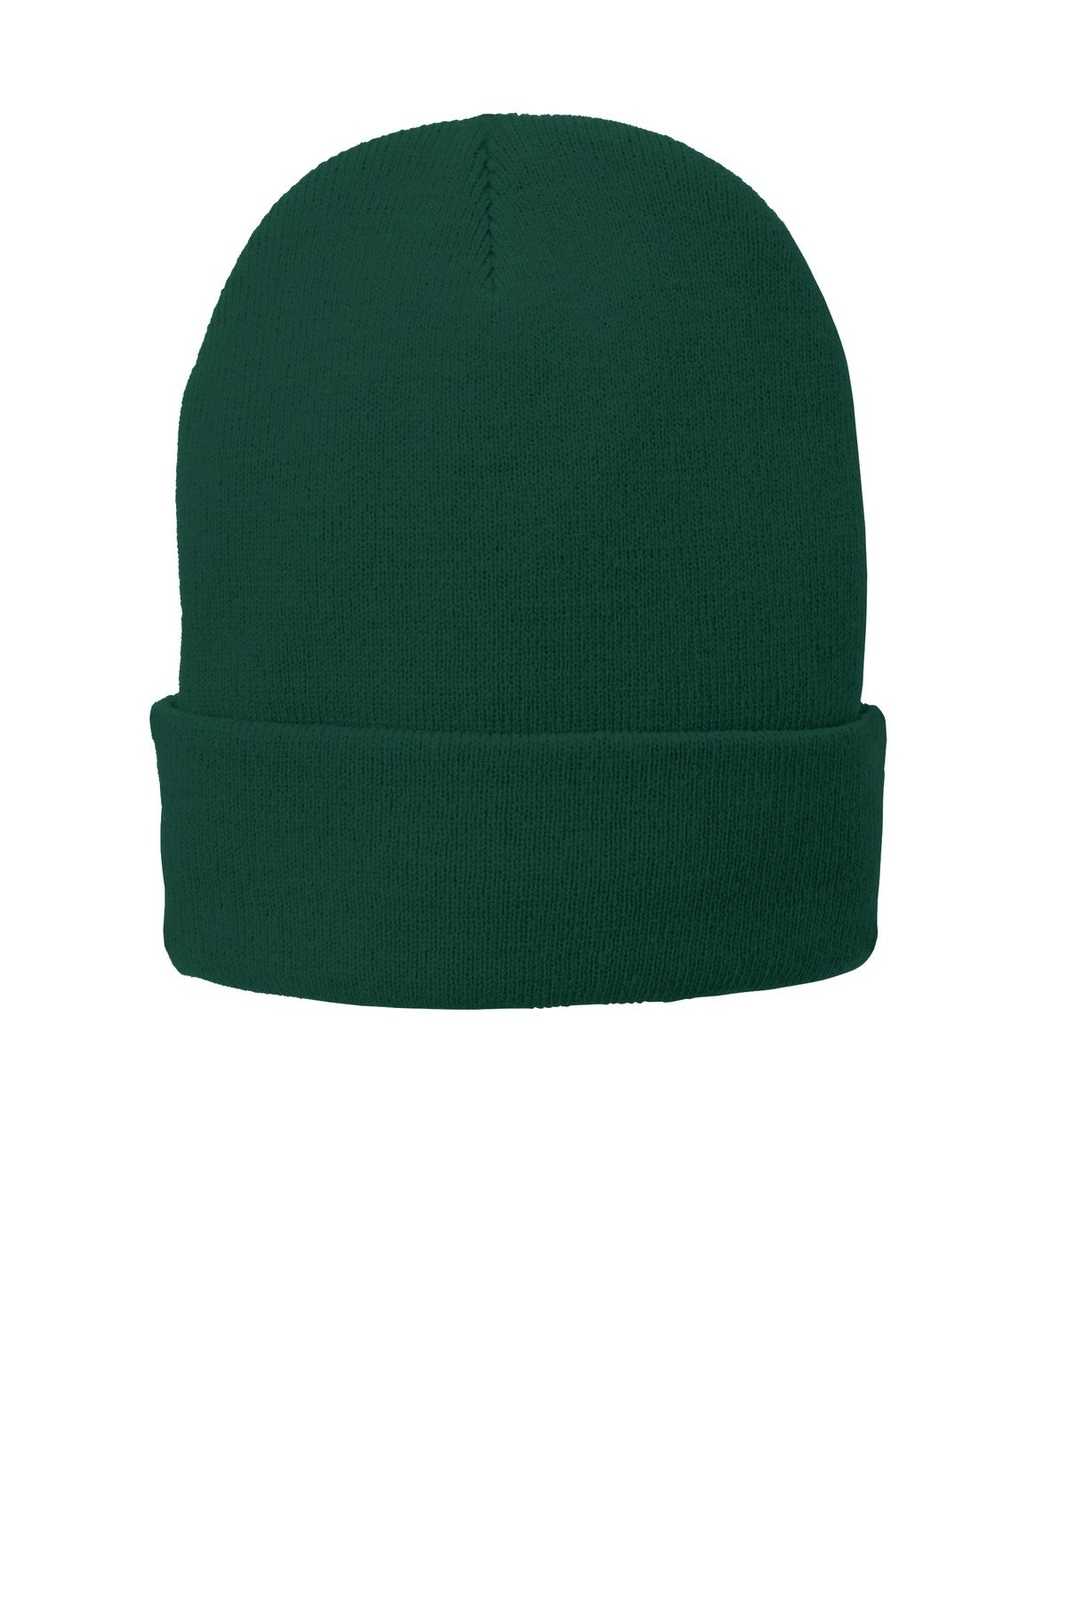 Port & Company CP90L Fleece-Lined Knit Cap with Cuff - Athletic Green - HIT a Double - 1